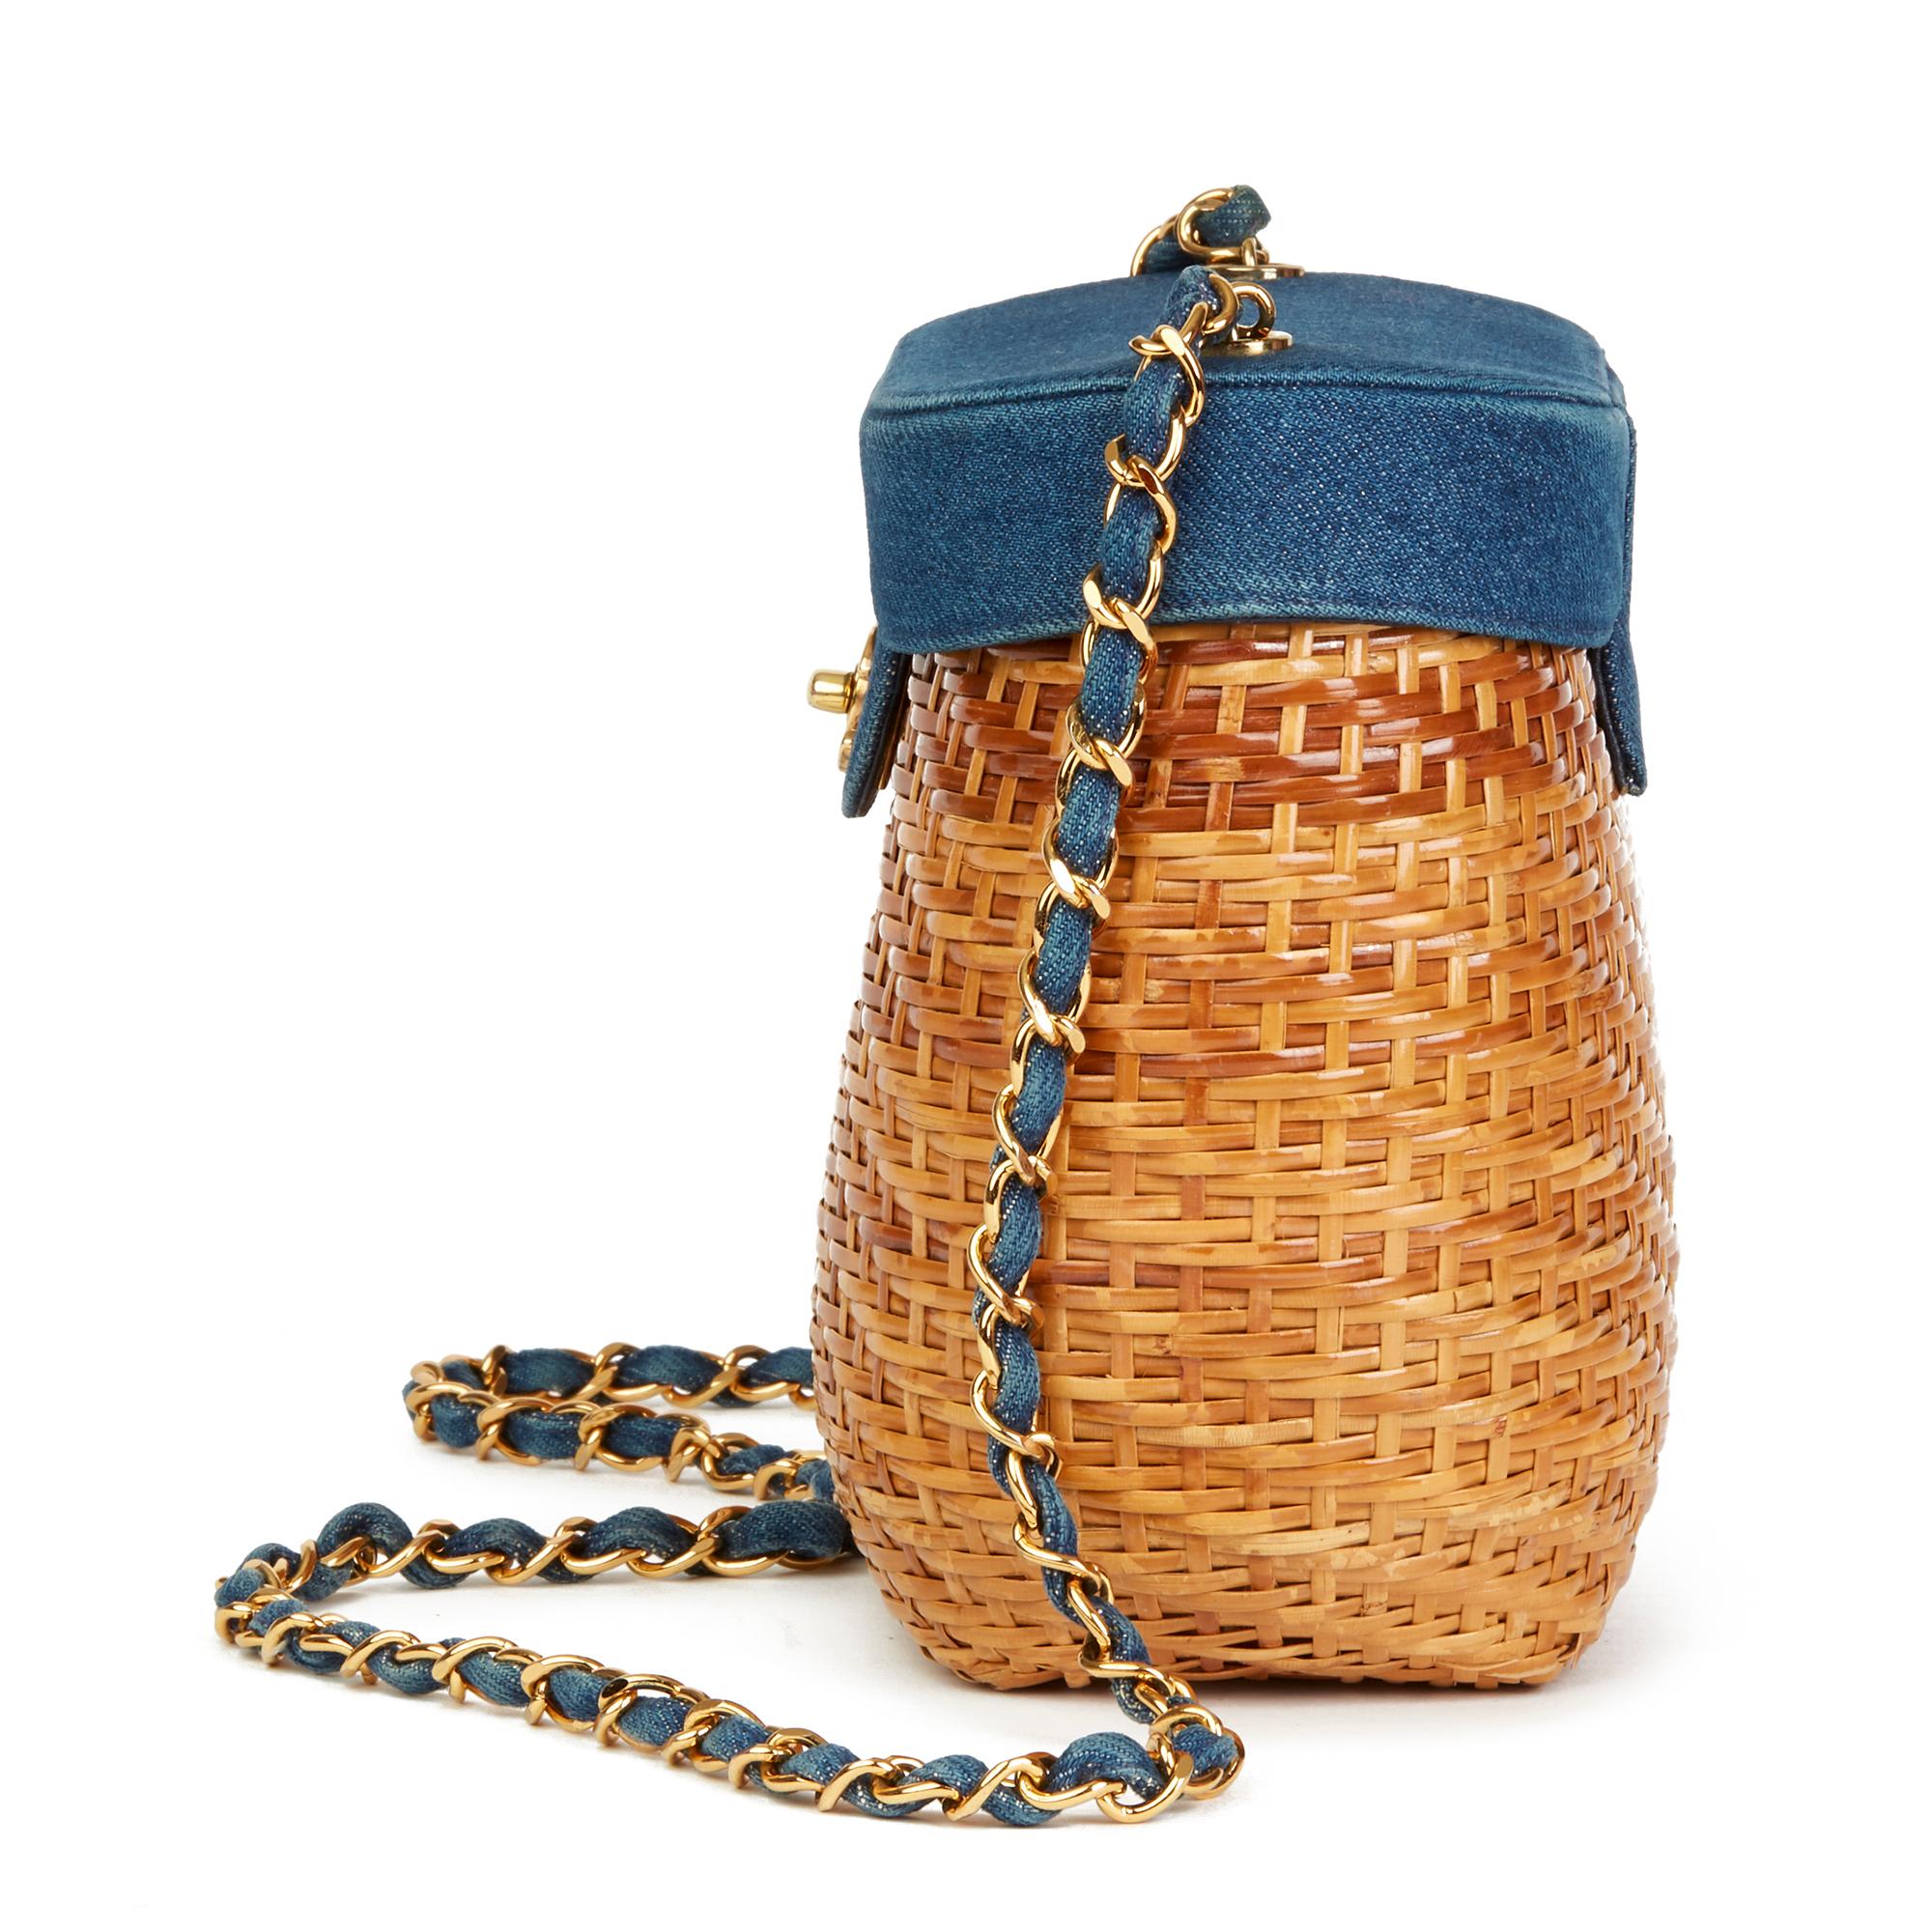 CHANEL
Blue Denim & Woven Straw 'Picnic' Vintage Basket Bag 

Reference: HB2496
Serial Number: 5205870
Age (Circa): 1997
Accompanied By: Chanel Dust Bag, Box, Authenticity Card
Authenticity Details: Serial Sticker, Authenticity Card (Made in